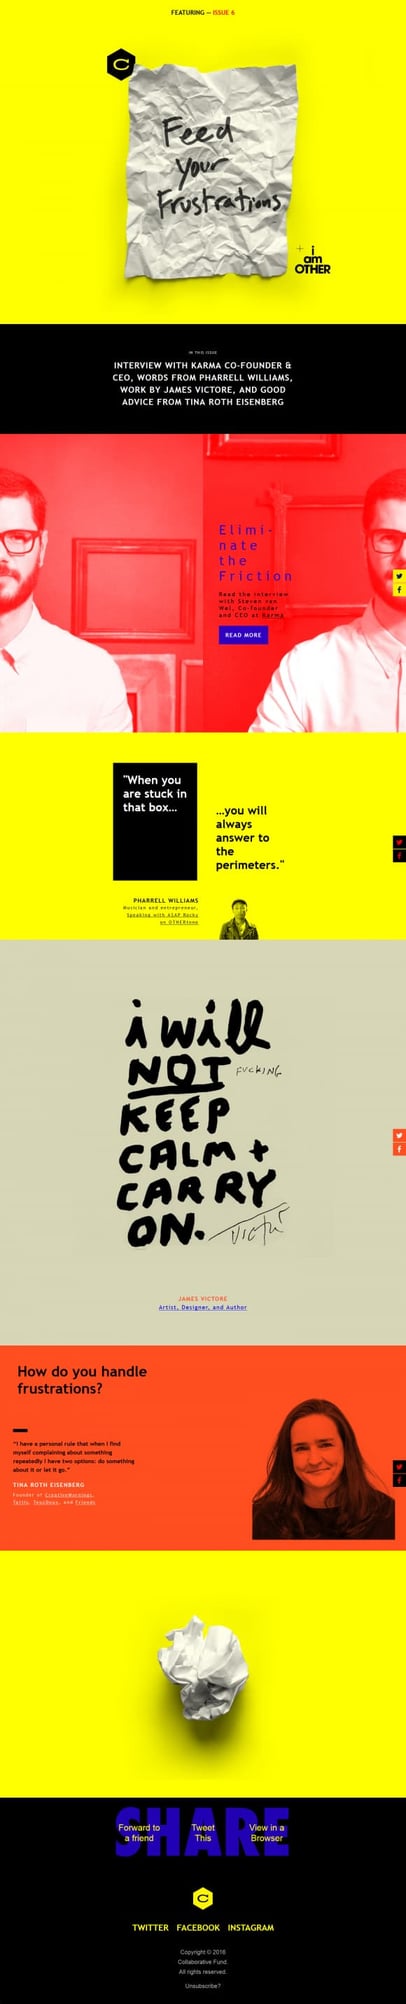 Collaborative Fund Email Newsletter.jpg?width=406&name=Collaborative Fund Email Newsletter - 14 of the Best Examples of Beautiful Email Design